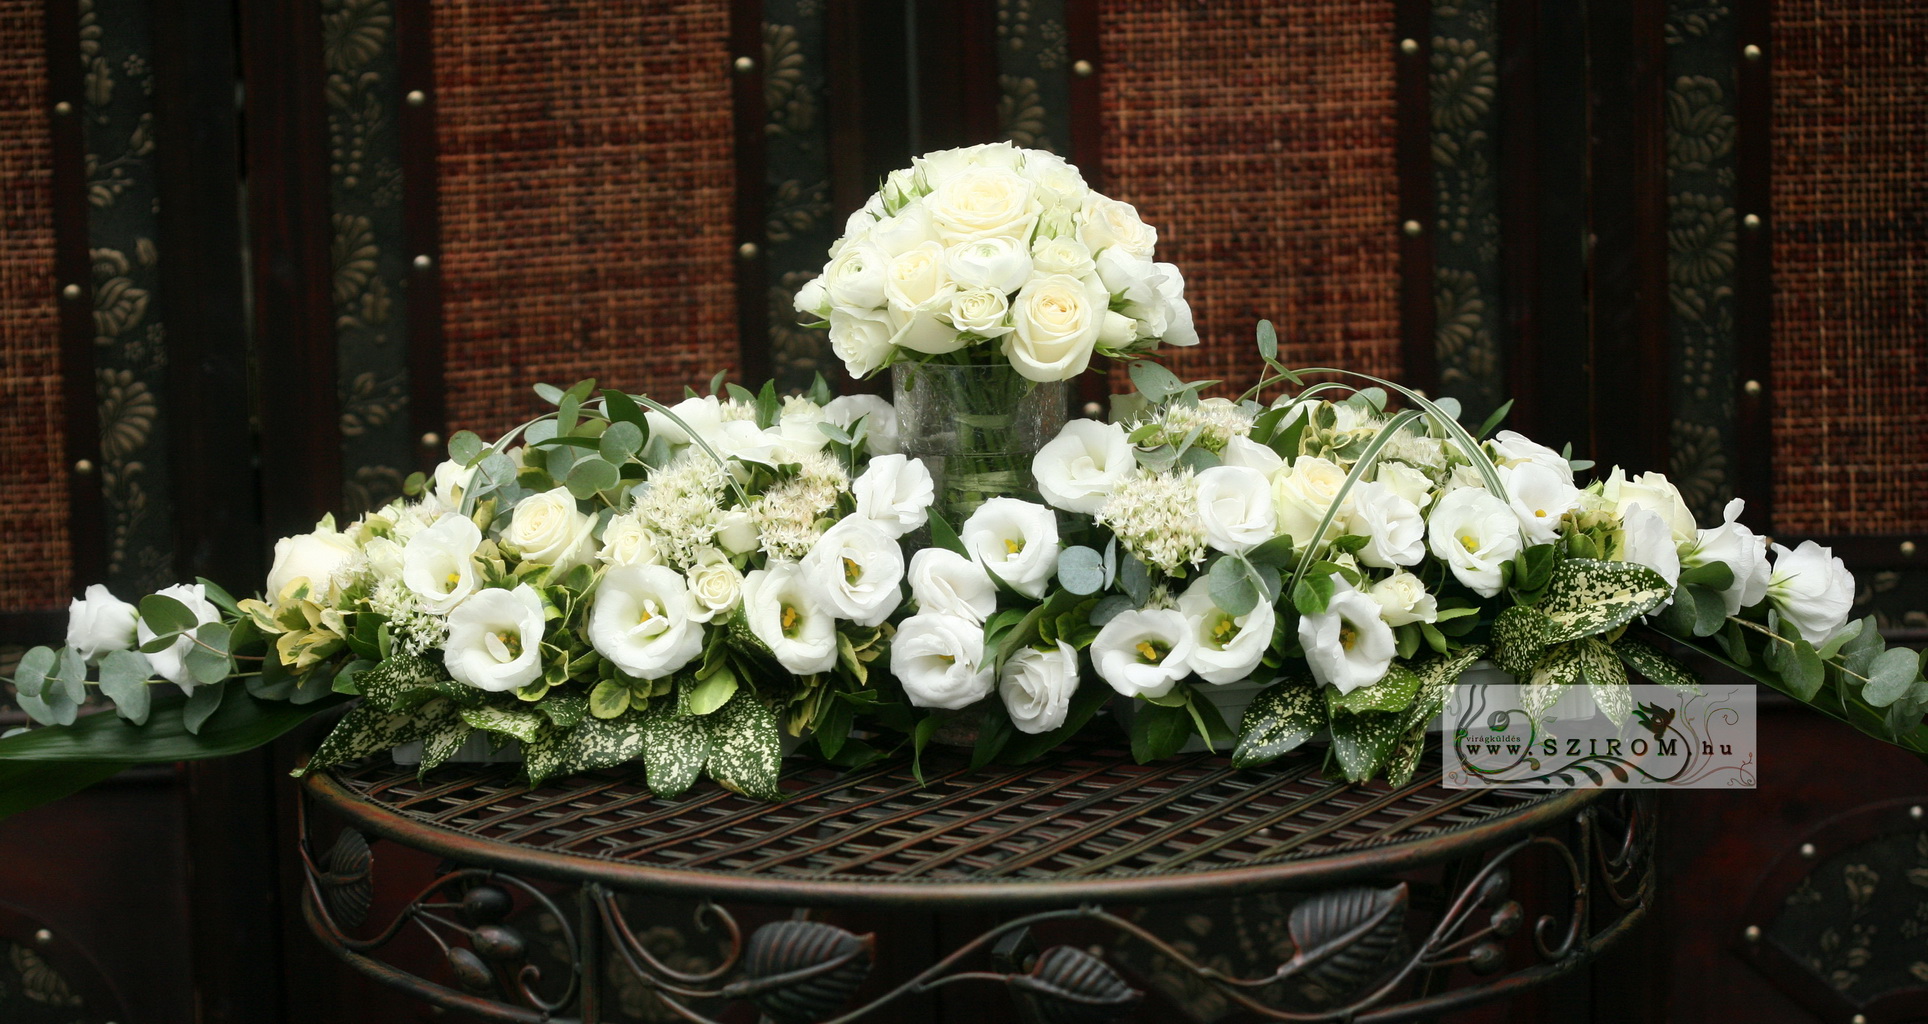 flower delivery Budapest - Main table centerpiece with white eustoma and roses, place bridal bouquet in center Hotel Normafa, wedding